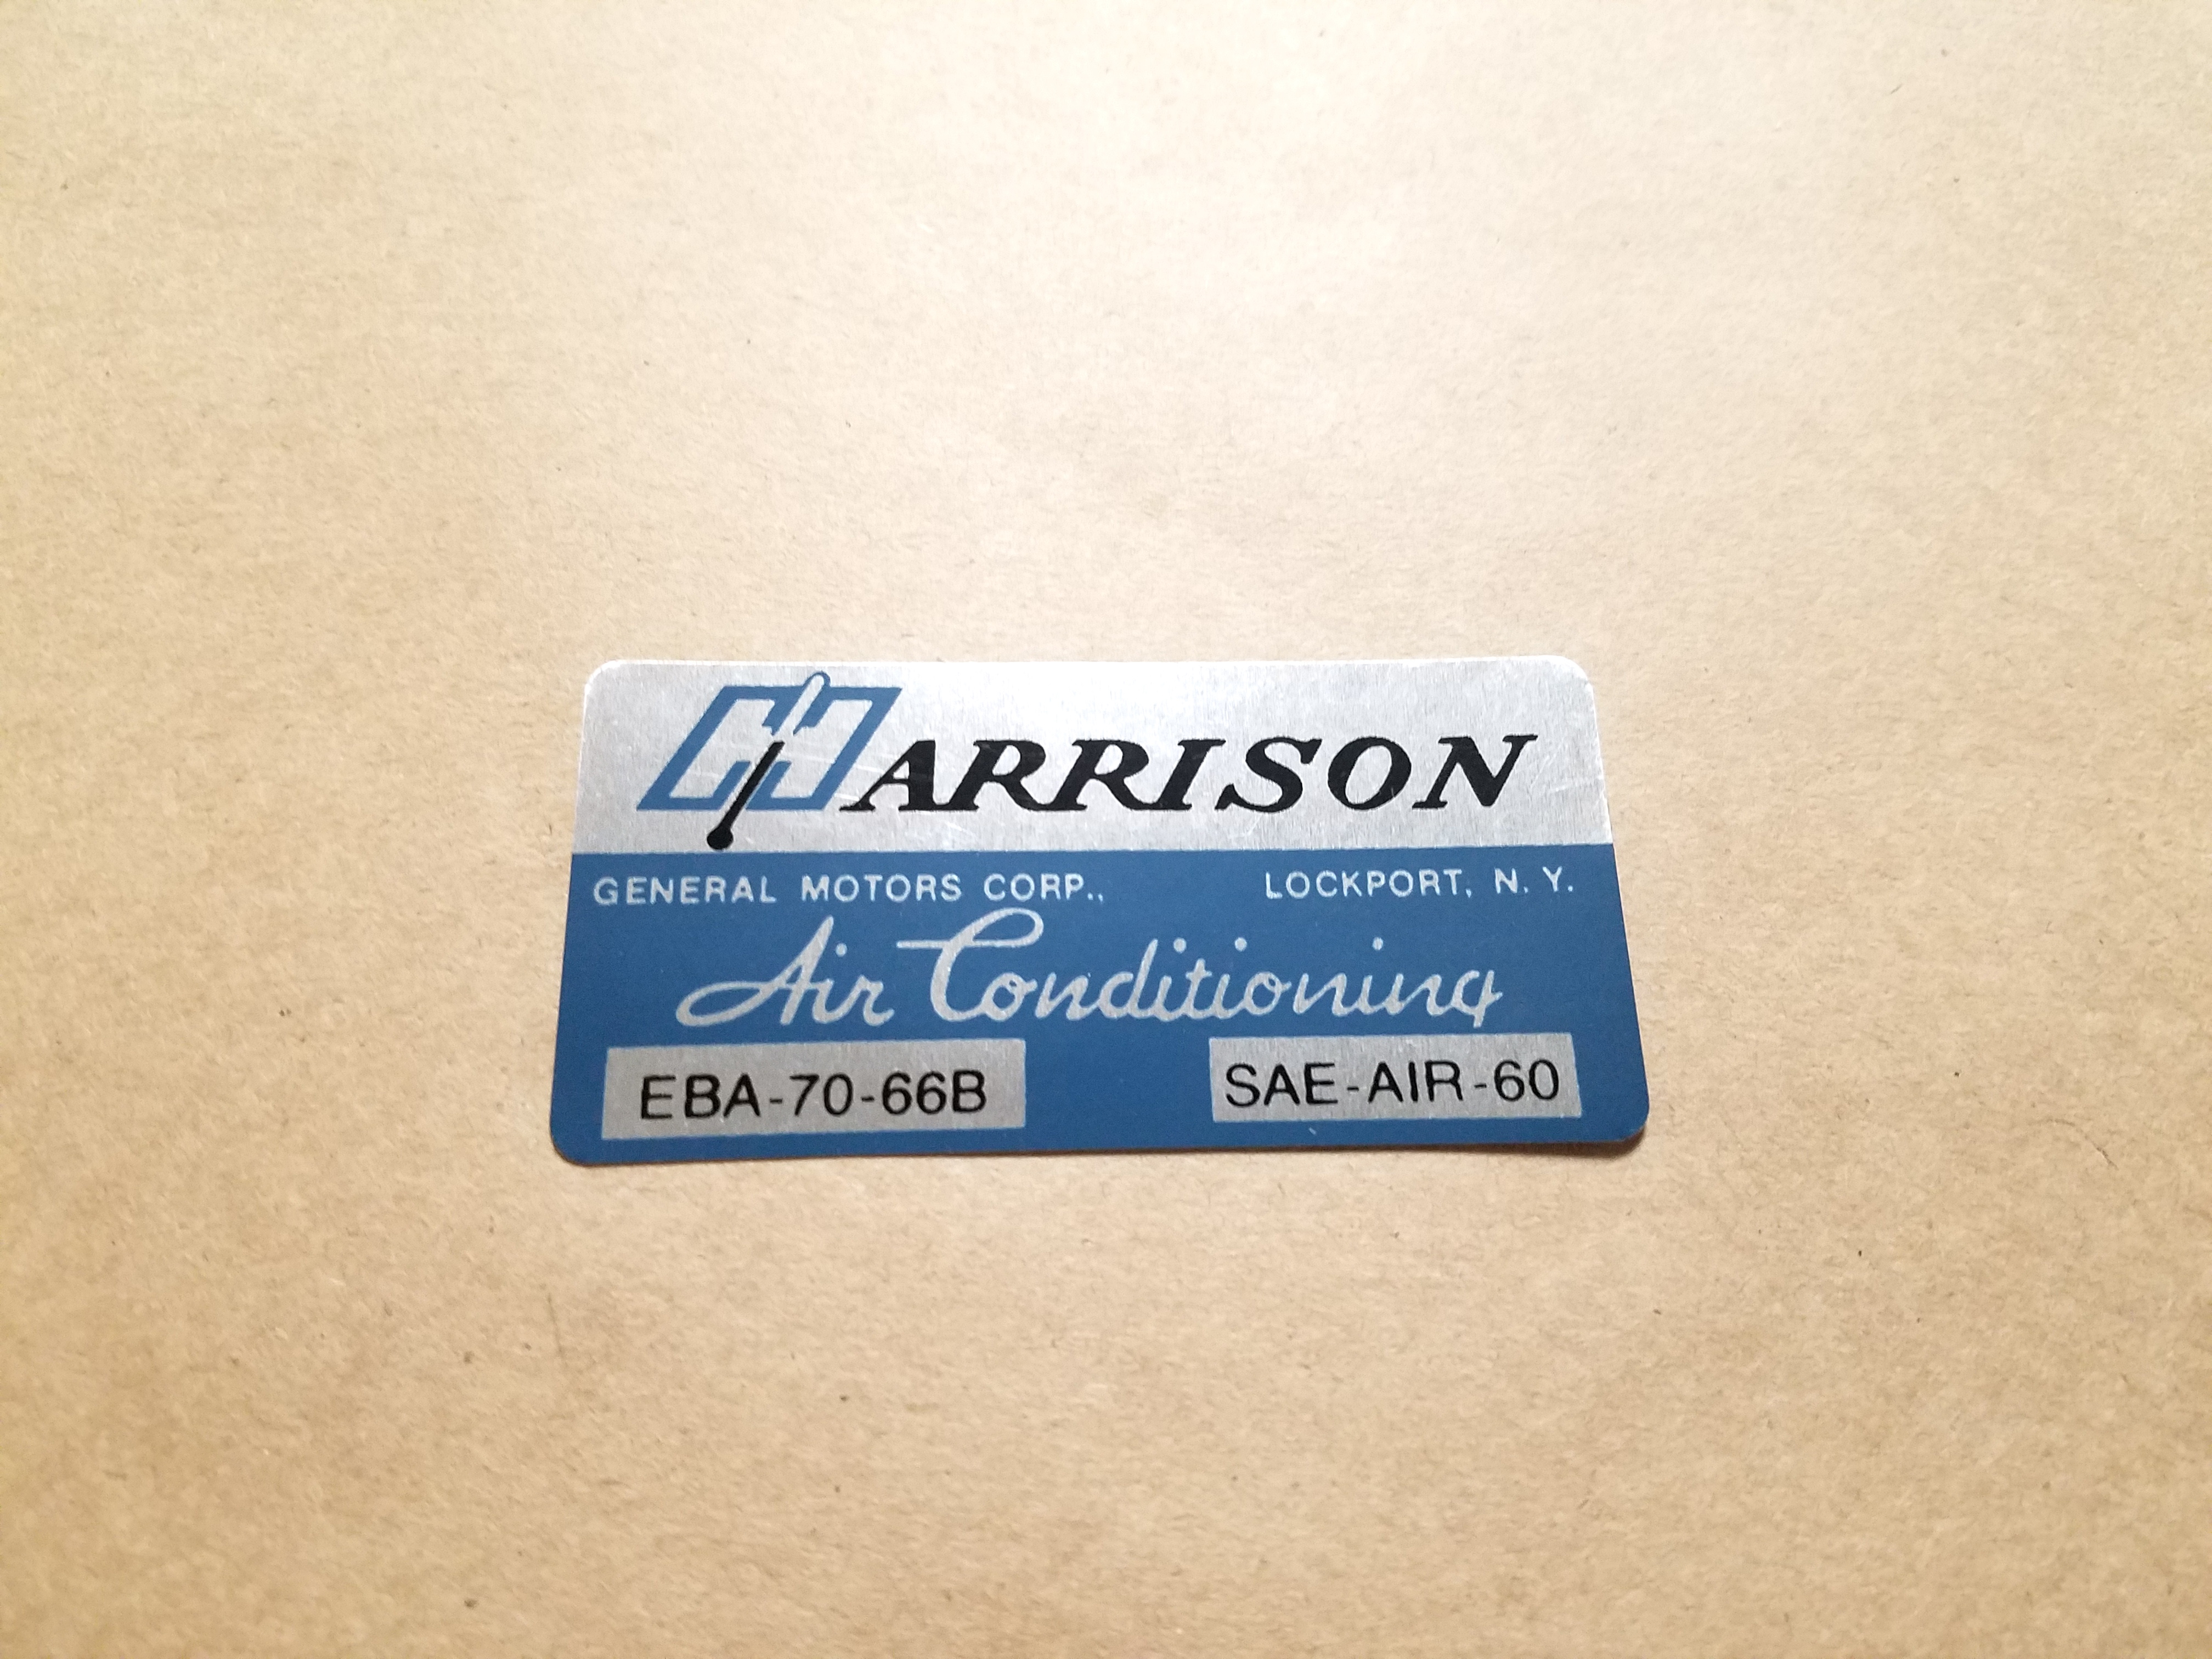 1966 Decal Firgidaire Air Conditioner Compressor